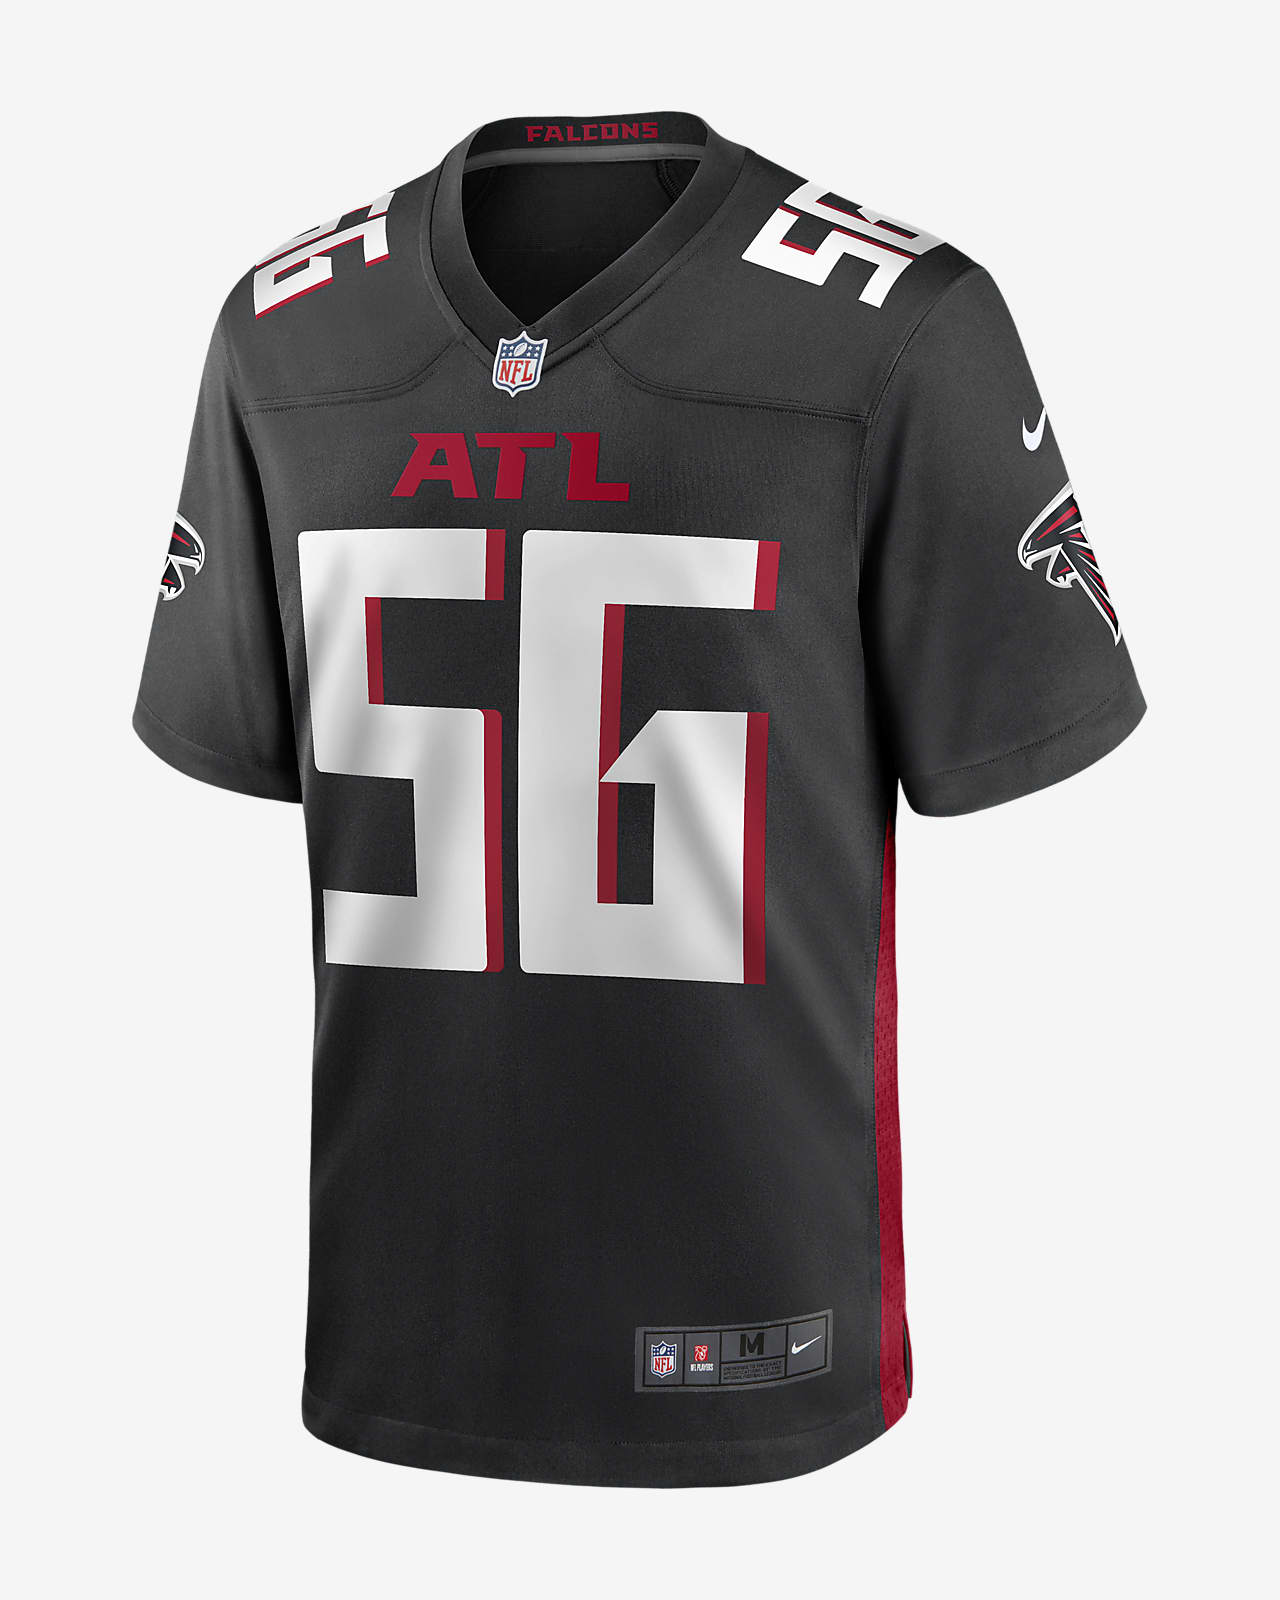 where can i buy a falcons jersey